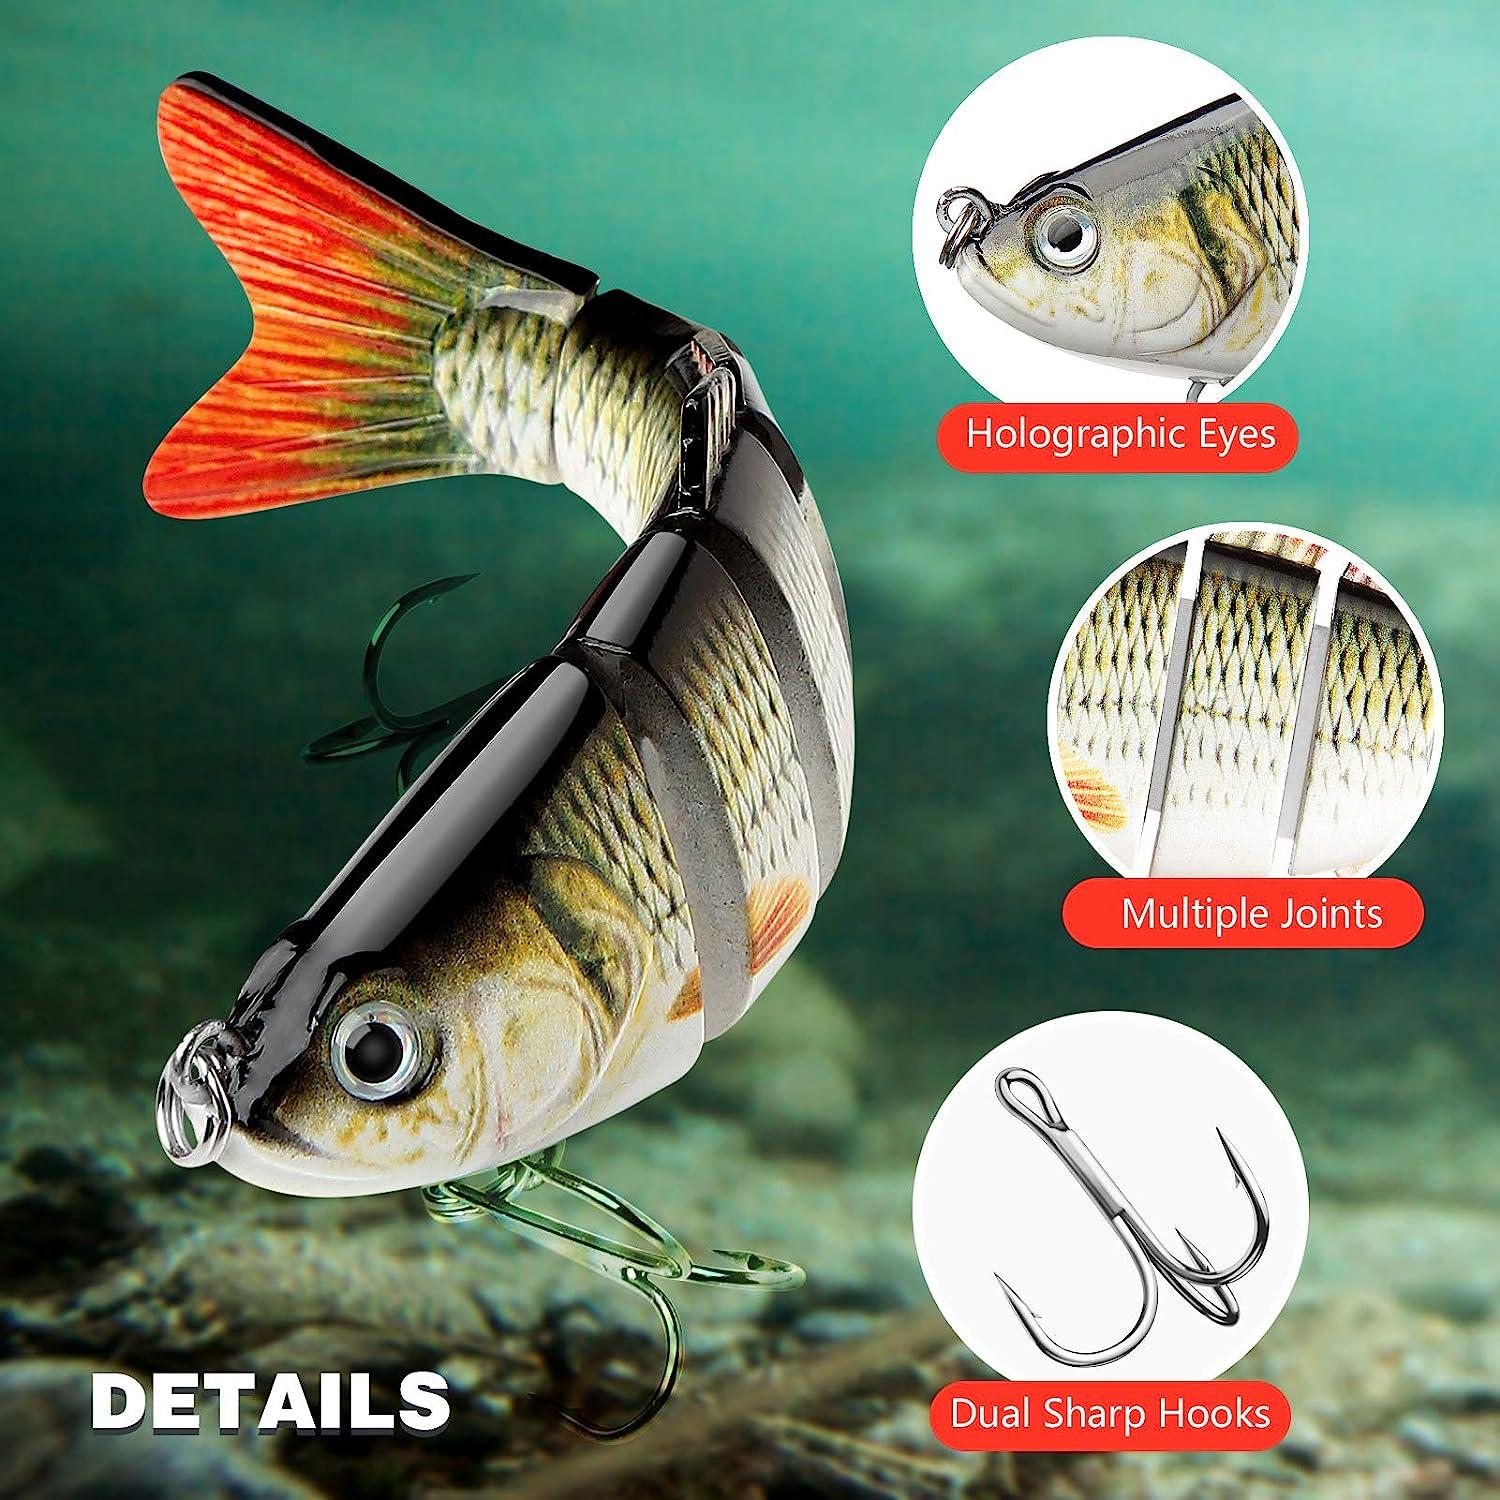 TRUSCEND Fishing Lures for Bass Swim Baits for Bass Fishing Top Water Fishing  Gear Fishing Lures for Walleye and Pike Slow Sinking Freshwater Saltwater,  Soft Plastic Lures -  Canada